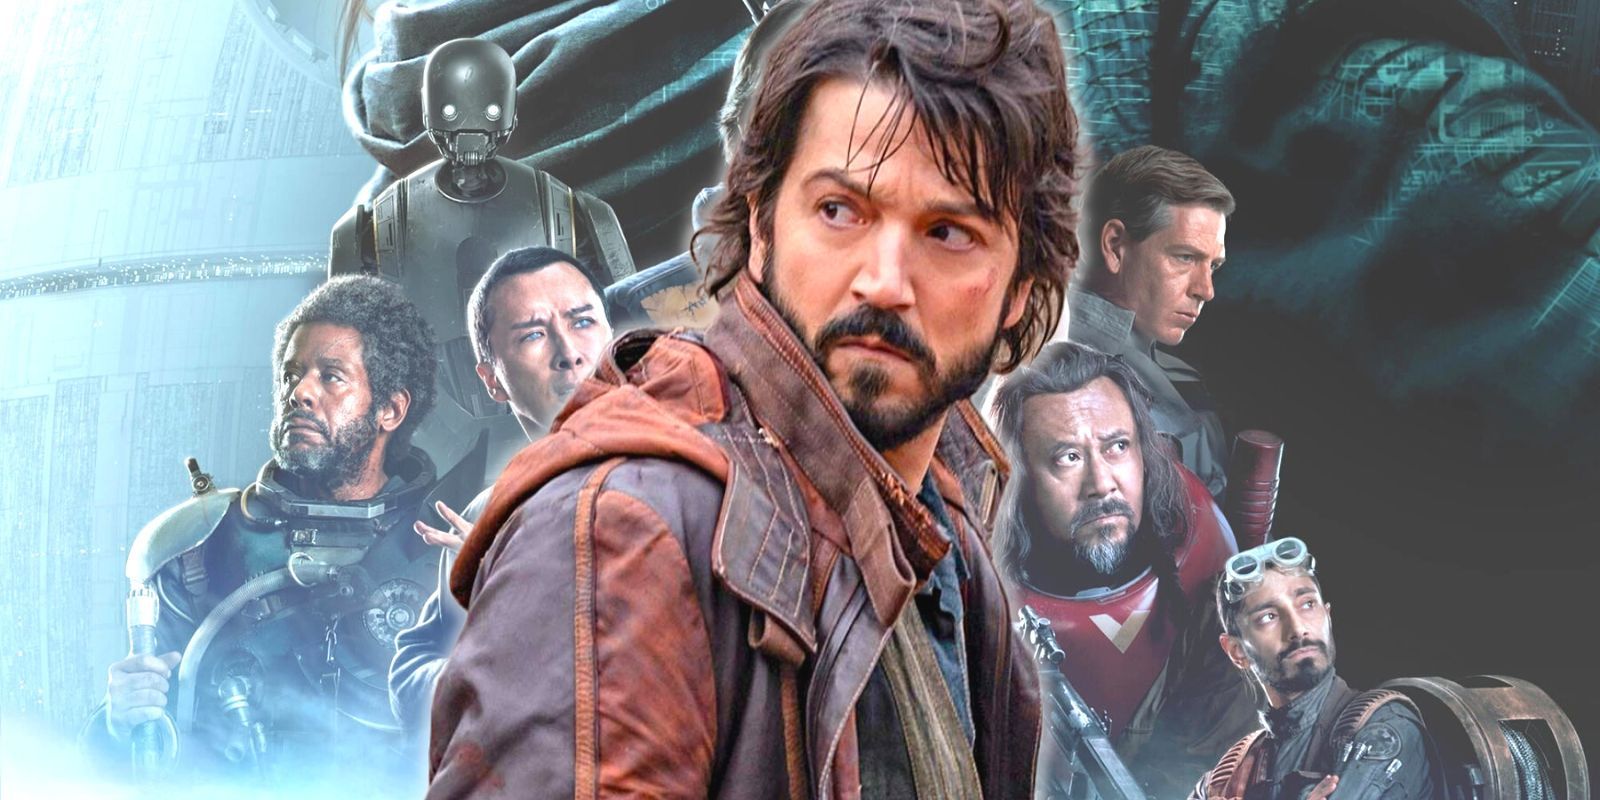 Cassian Andor glancing over his shoulder with the cast of Rogue One behind him